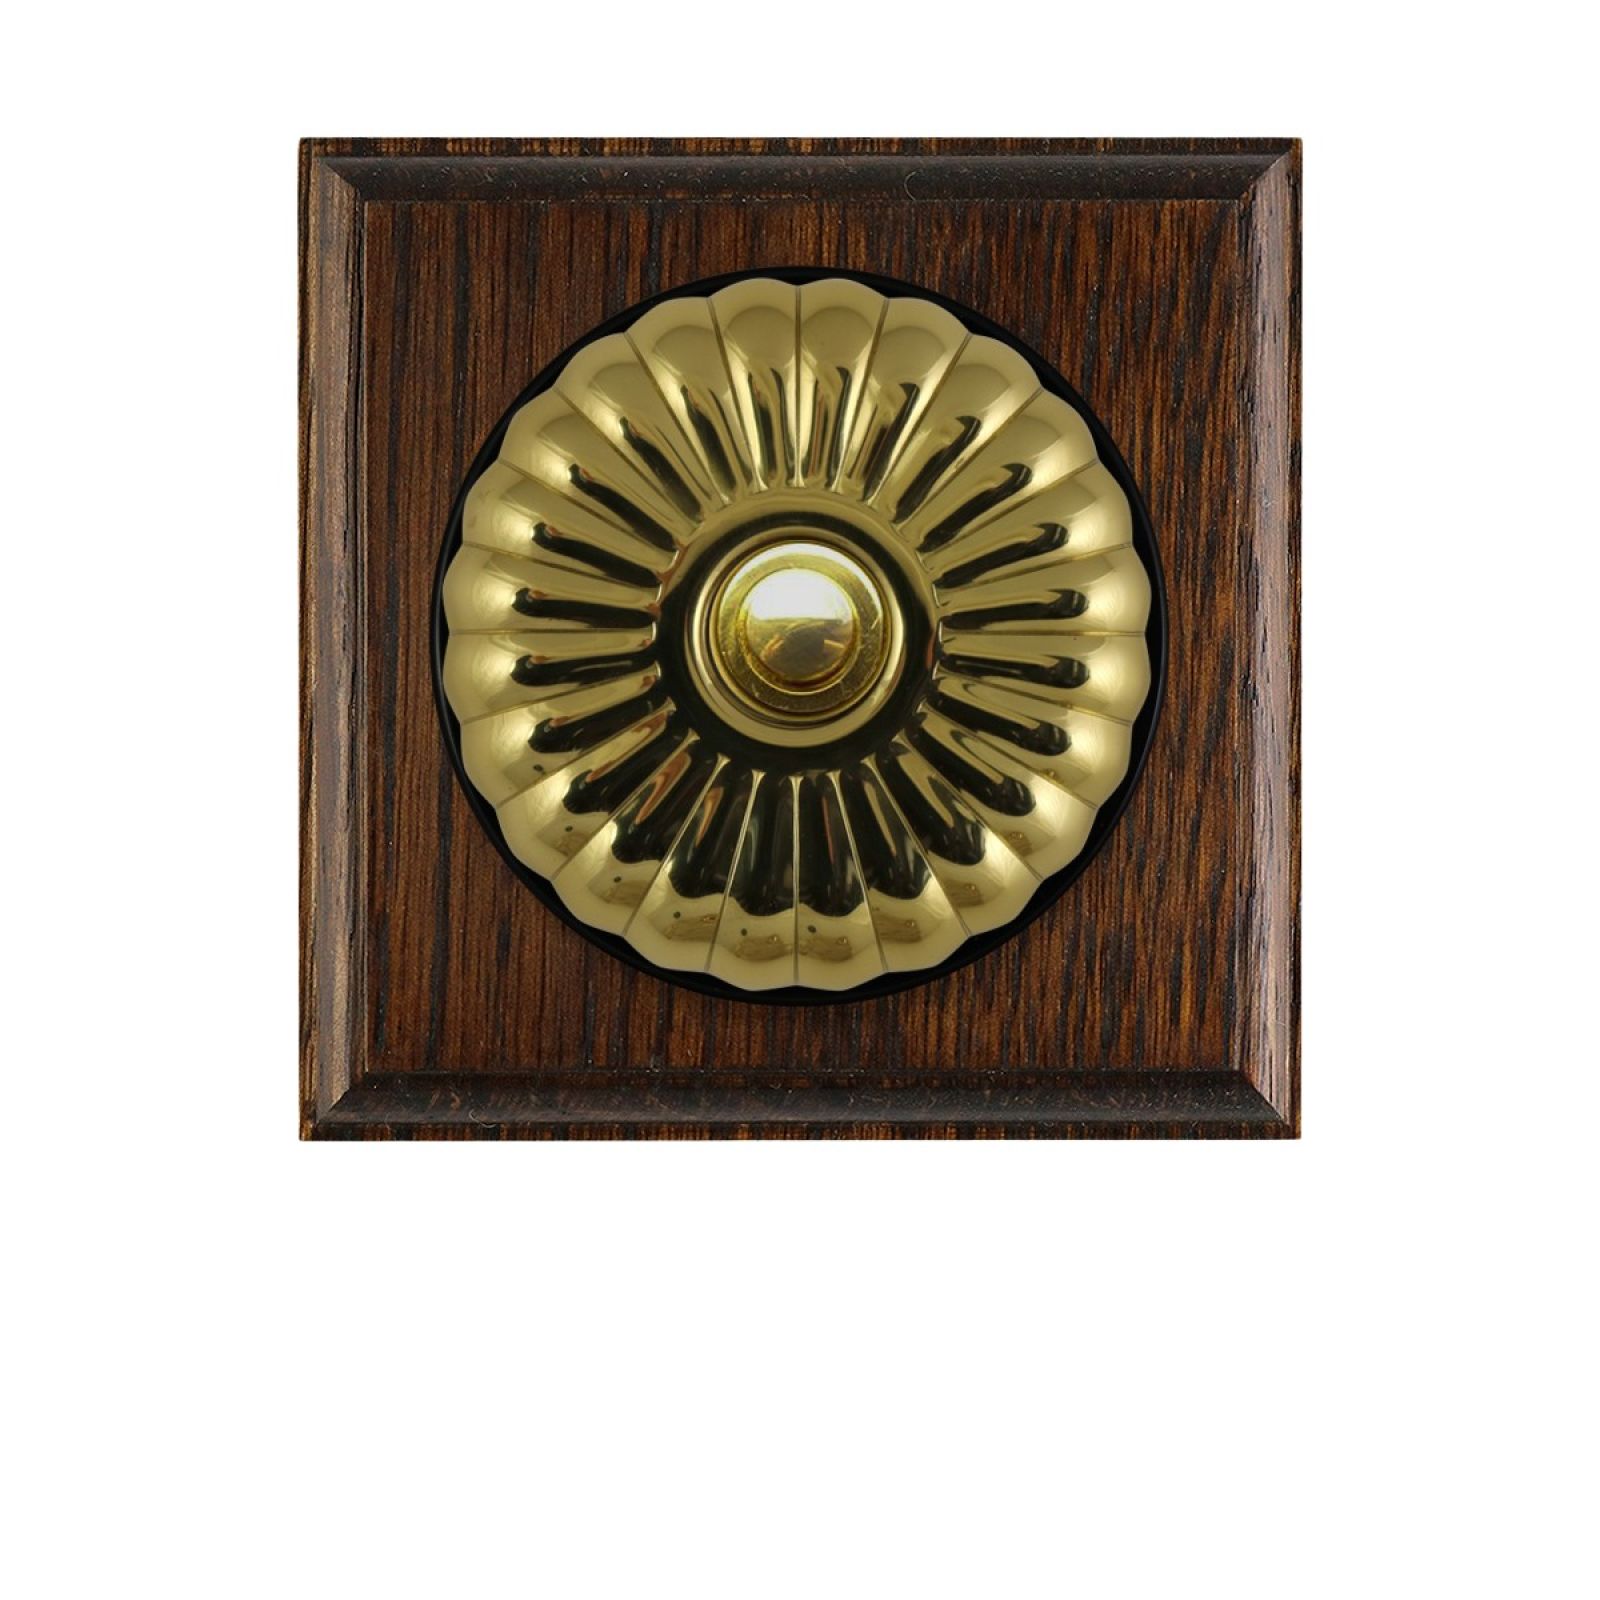 Brass Period Fluted Push Button Dimmer Switch - choice of finishes and gang options